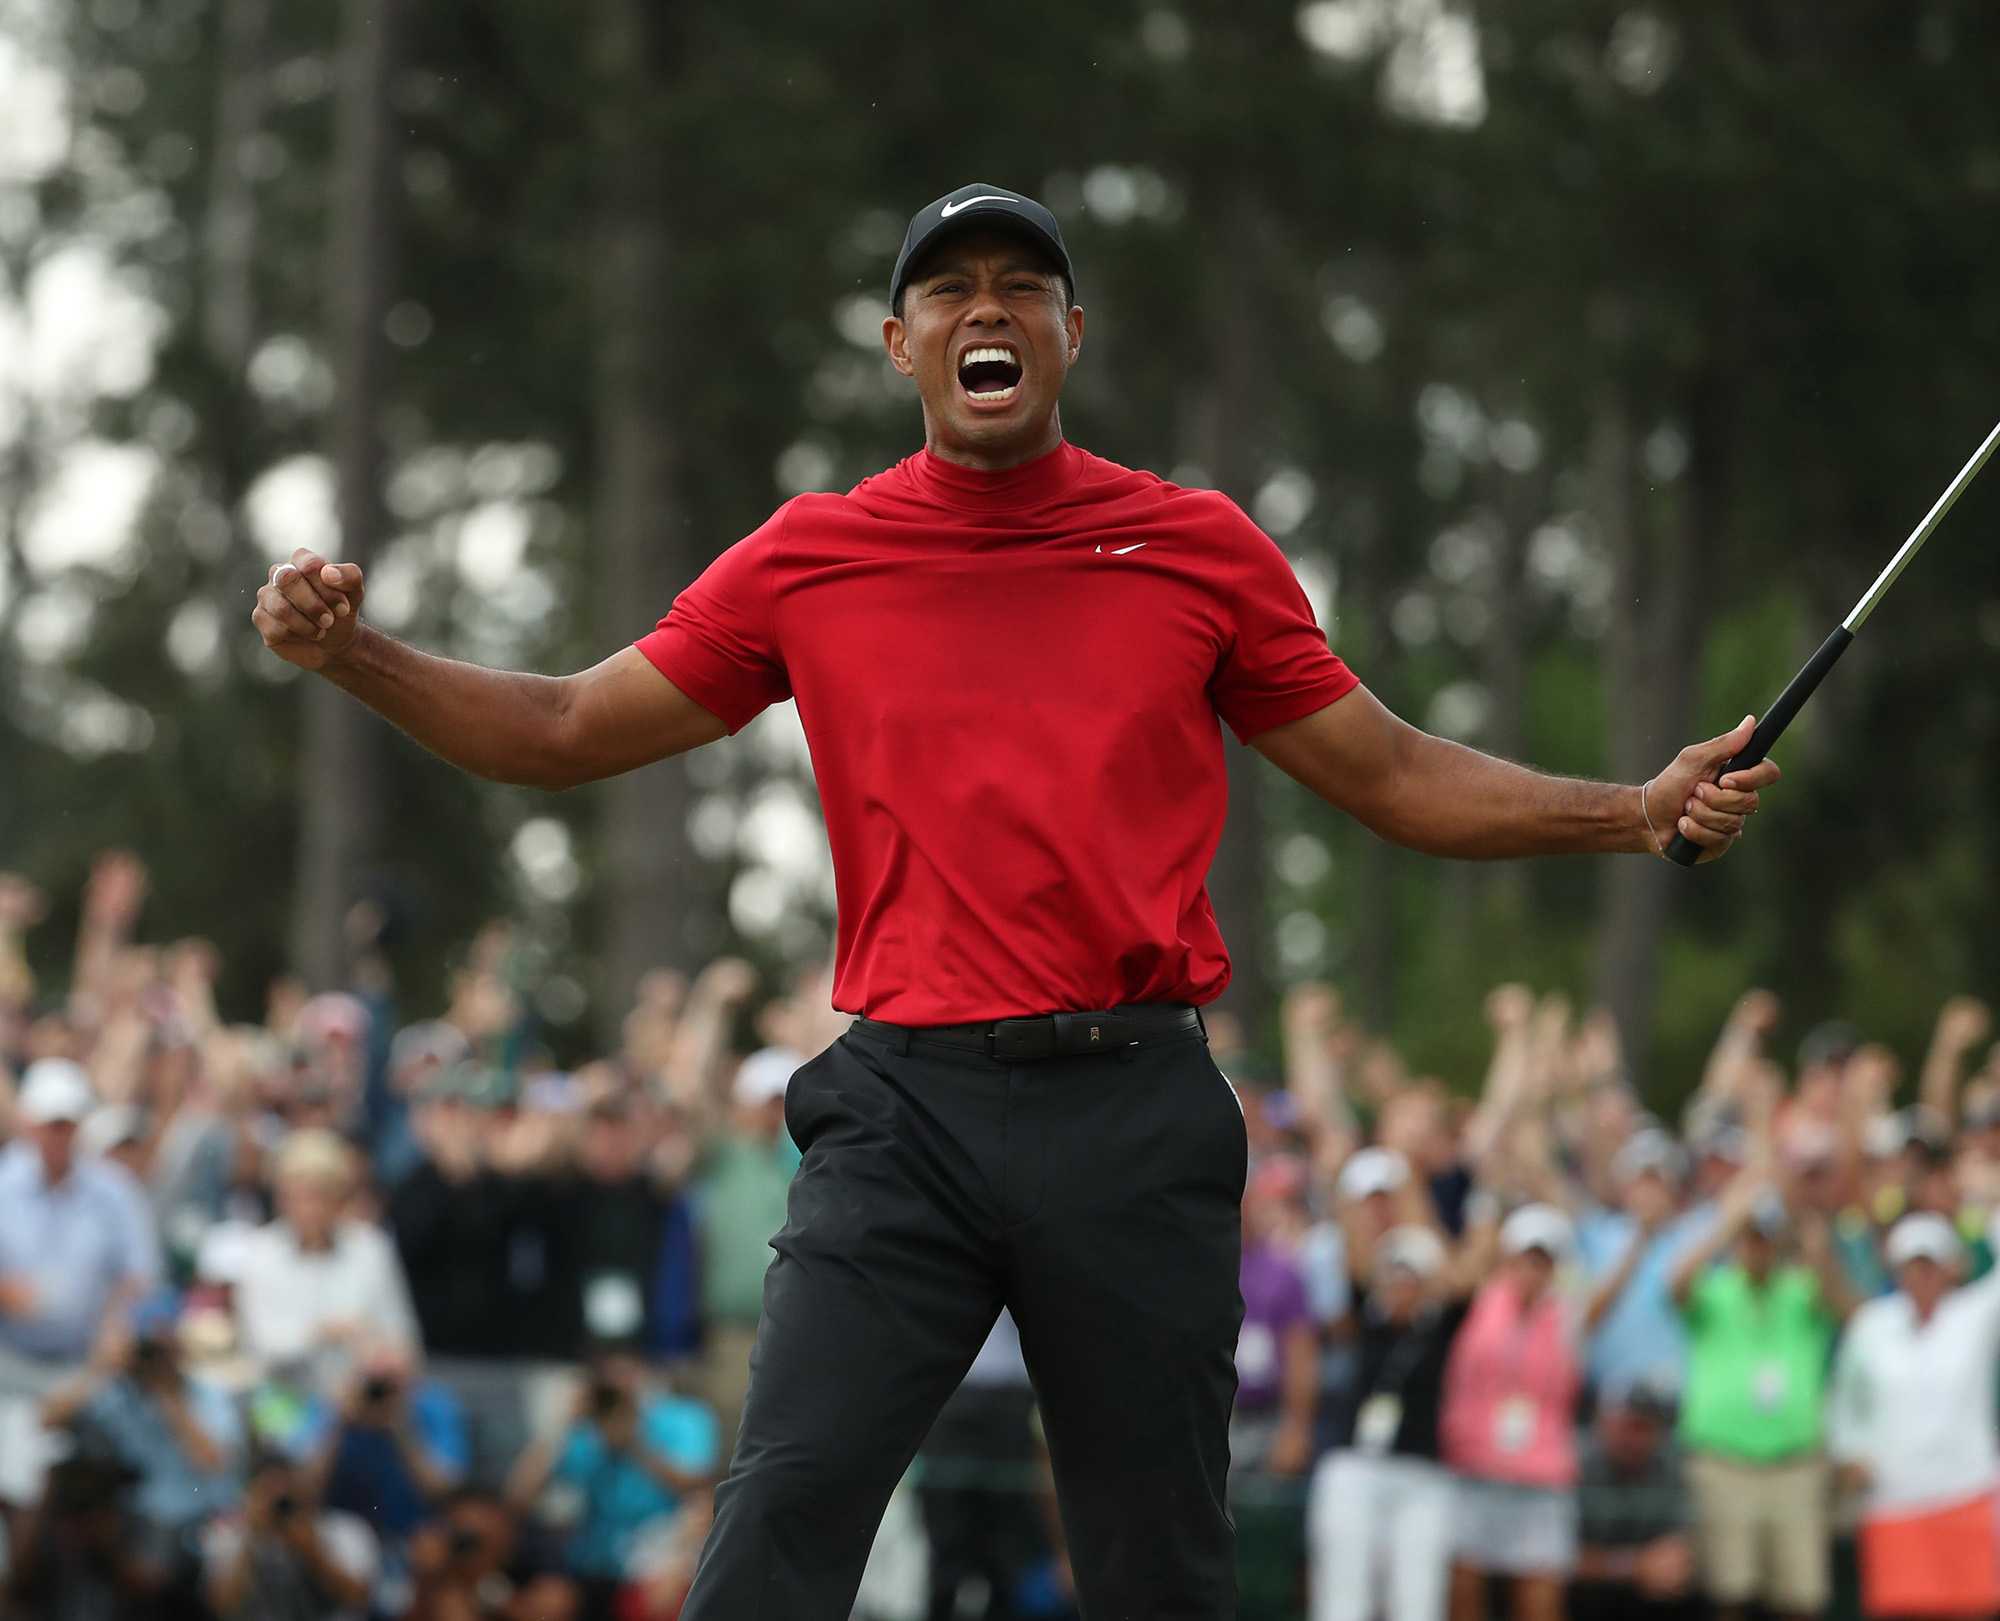 Tiger Woods celebrates after winning the Masters during the final round on Sunday, April 14, 2019, at Augusta National Golf Club in Augusta, Ga. (Jason Getz/Atlanta Journal-Constitution/TNS)